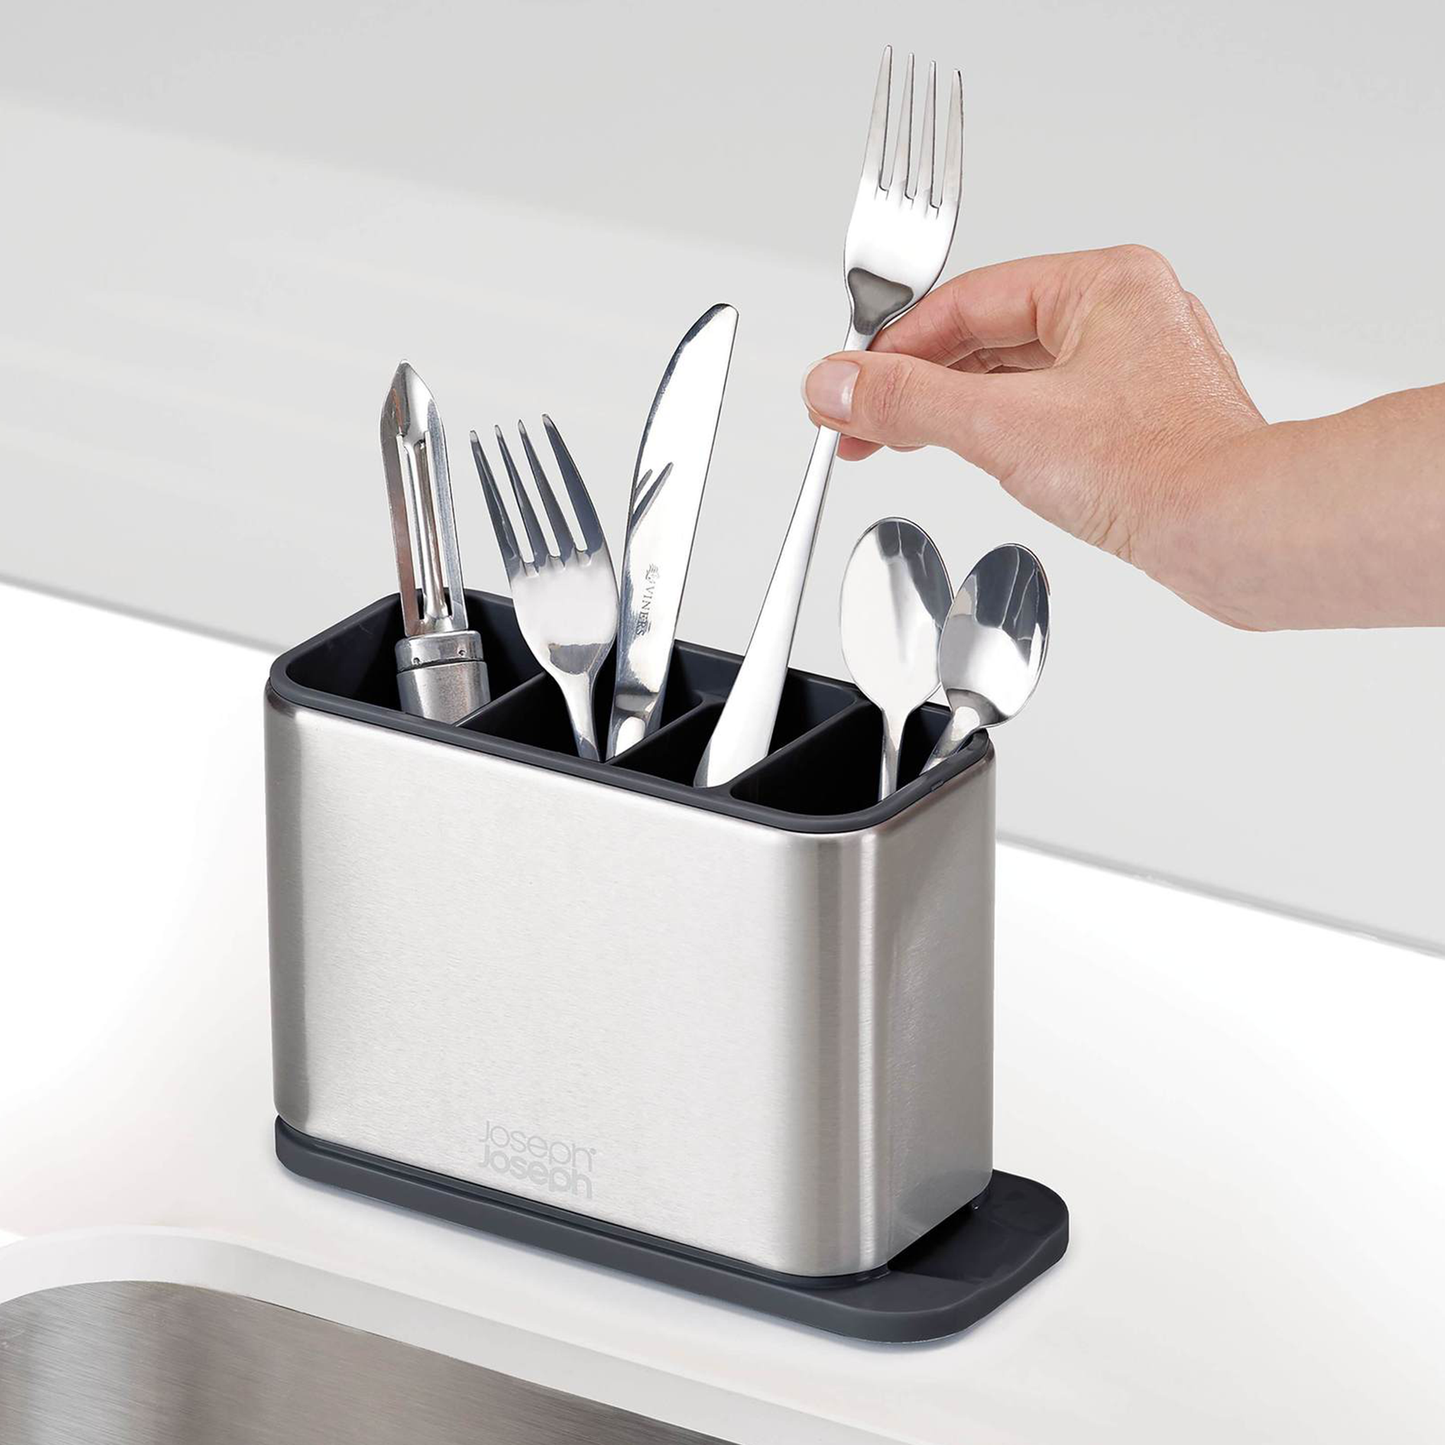 a person placing a fork into the cutlery drainer